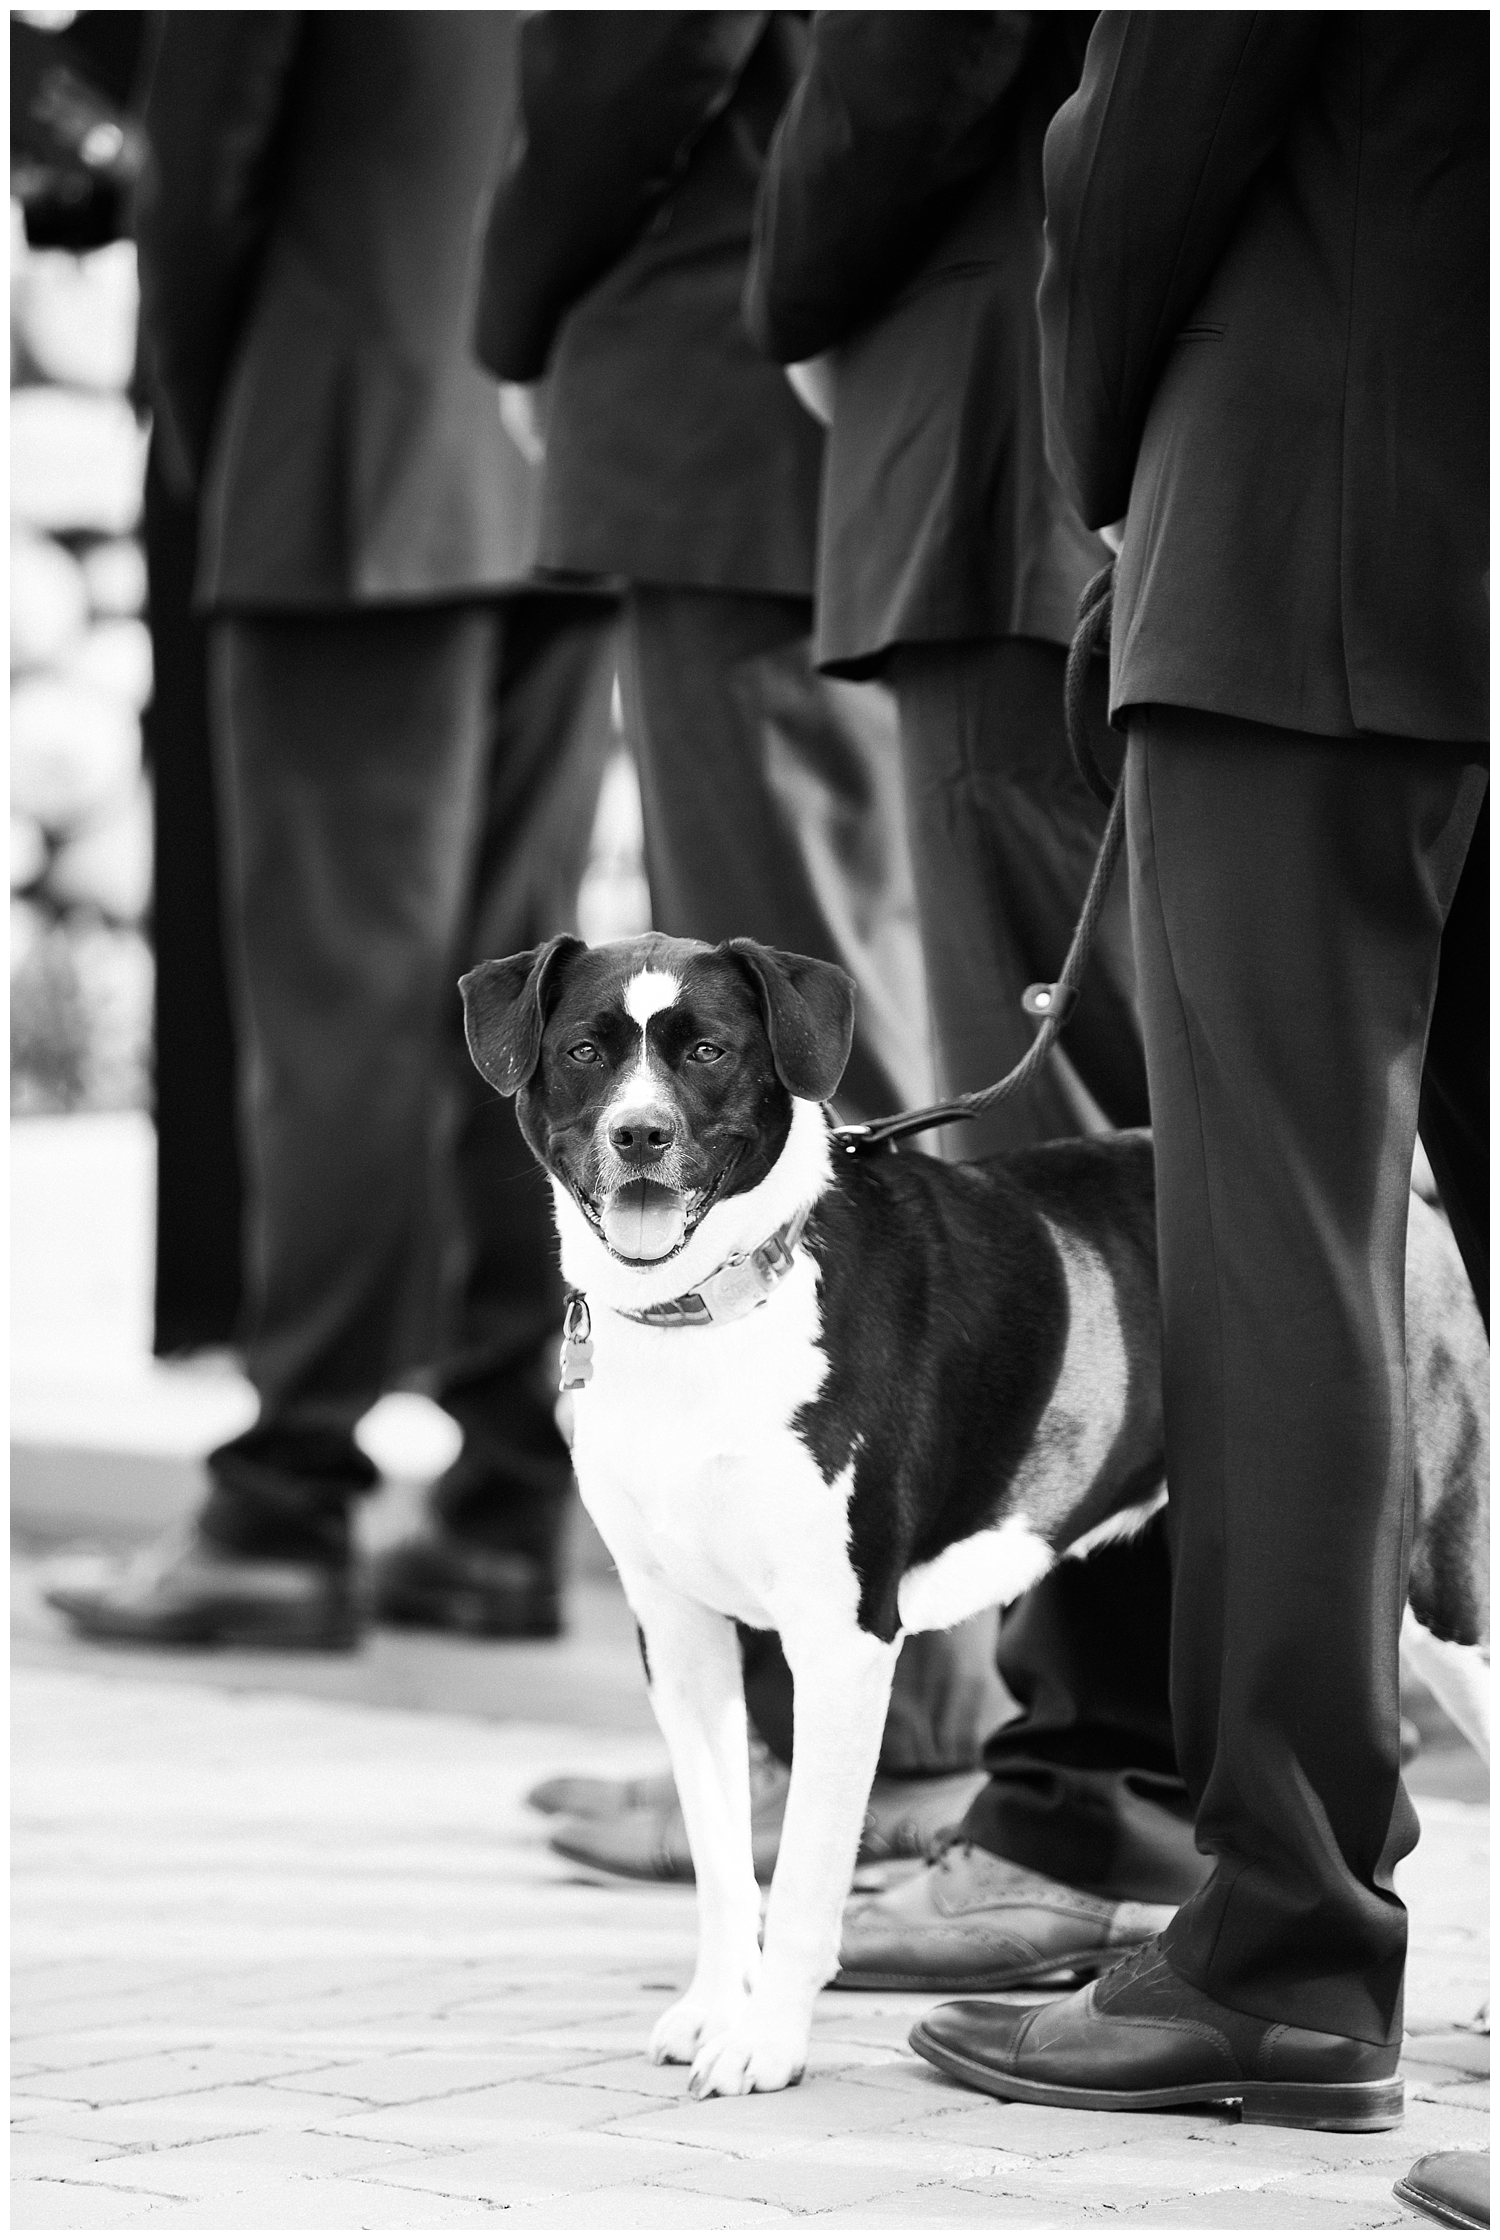 Dog at outside ceremony at Sugarloaf Mountain Resort Wedding in Maine, photos by Halie Olszowy.